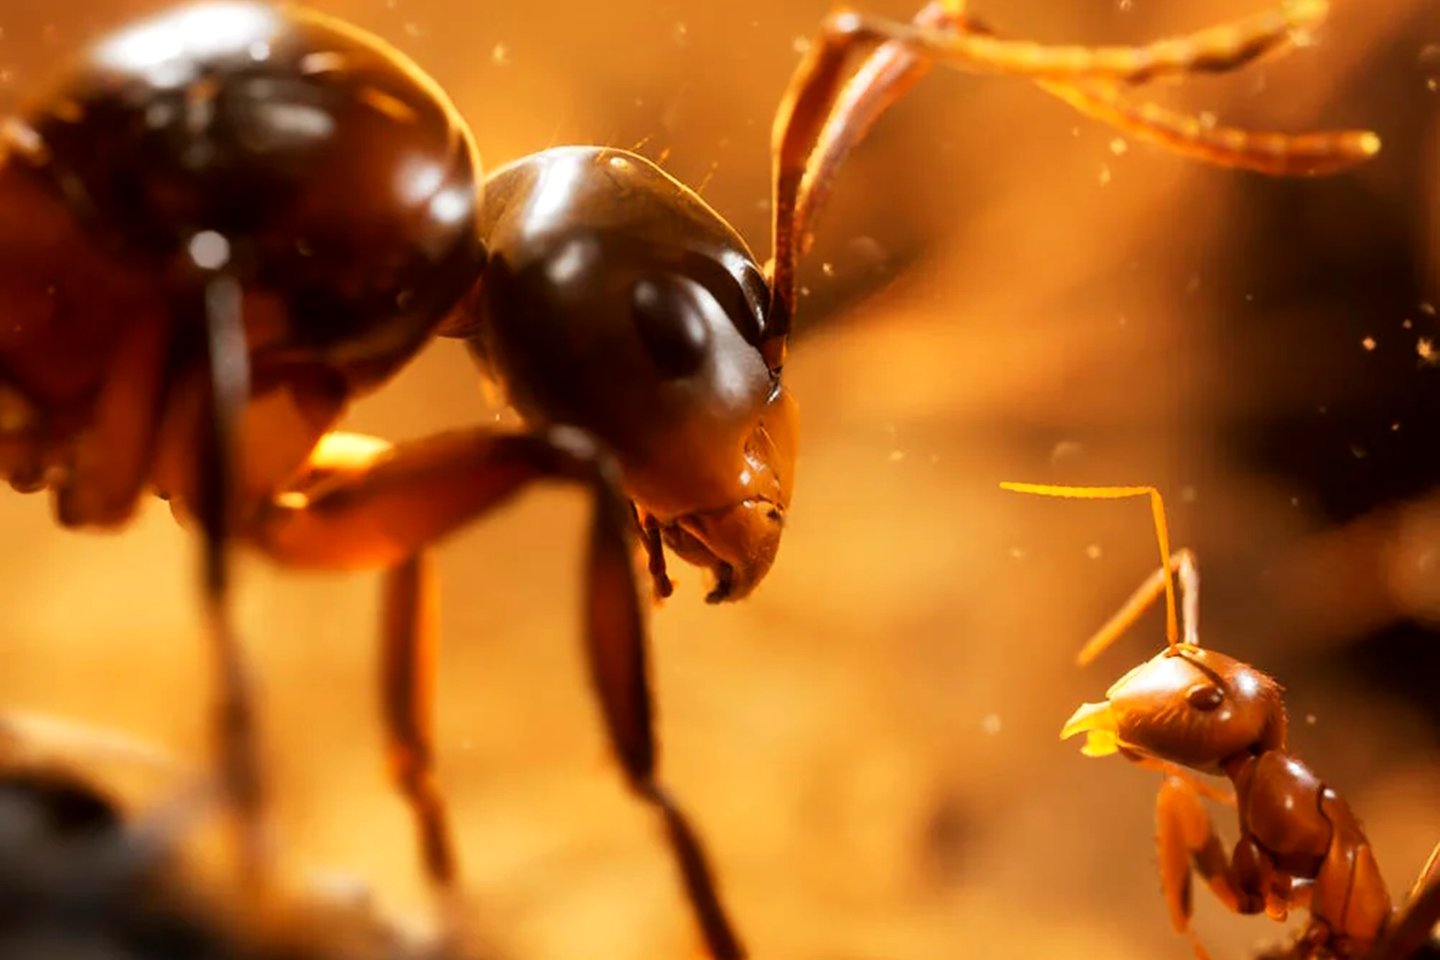 A new realistic game from Unreal Engine 5 that puts you in control of an army of ants!  Watch the trailer